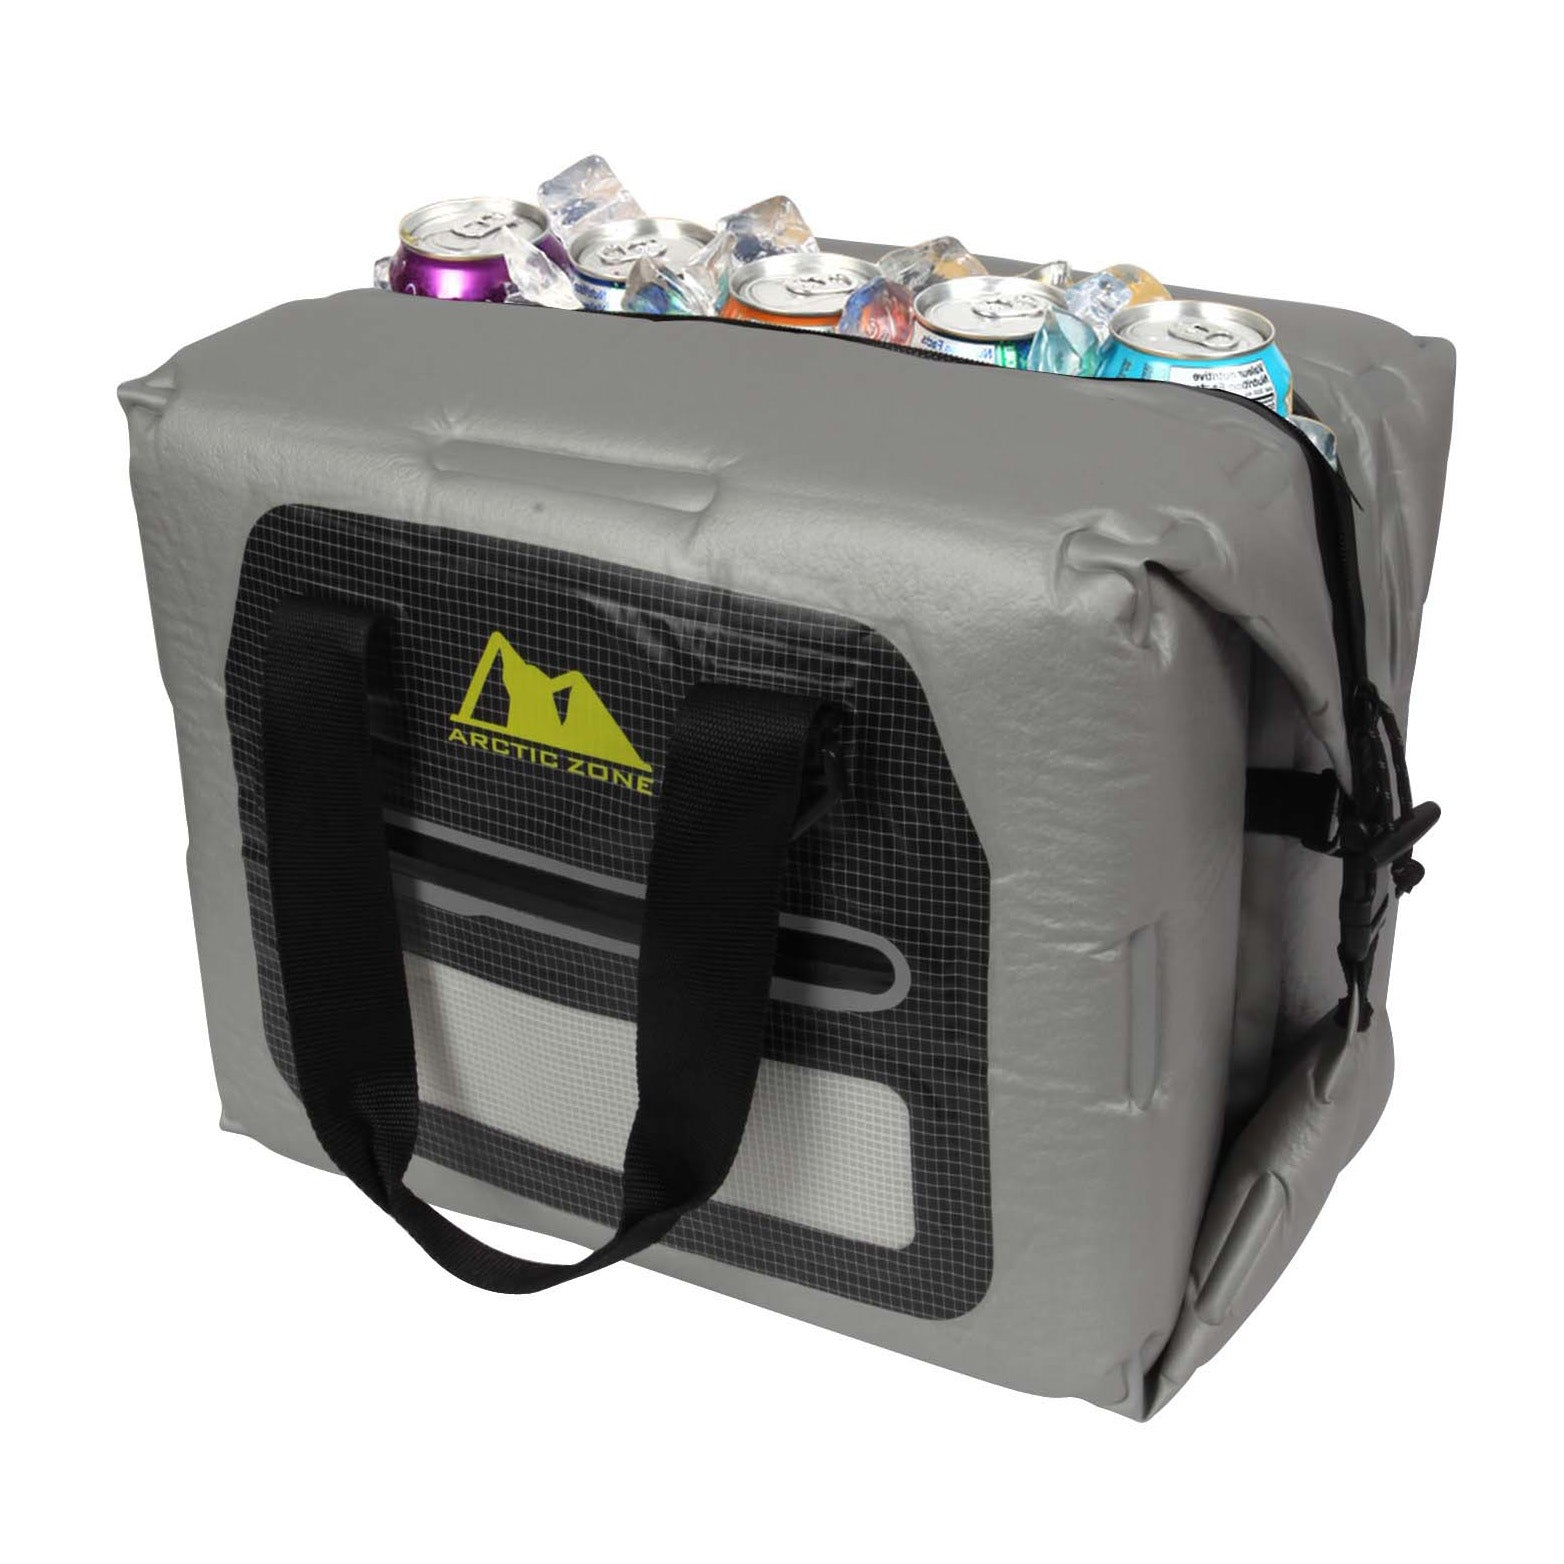 Arctic Zone® Self-Inflating Cooler